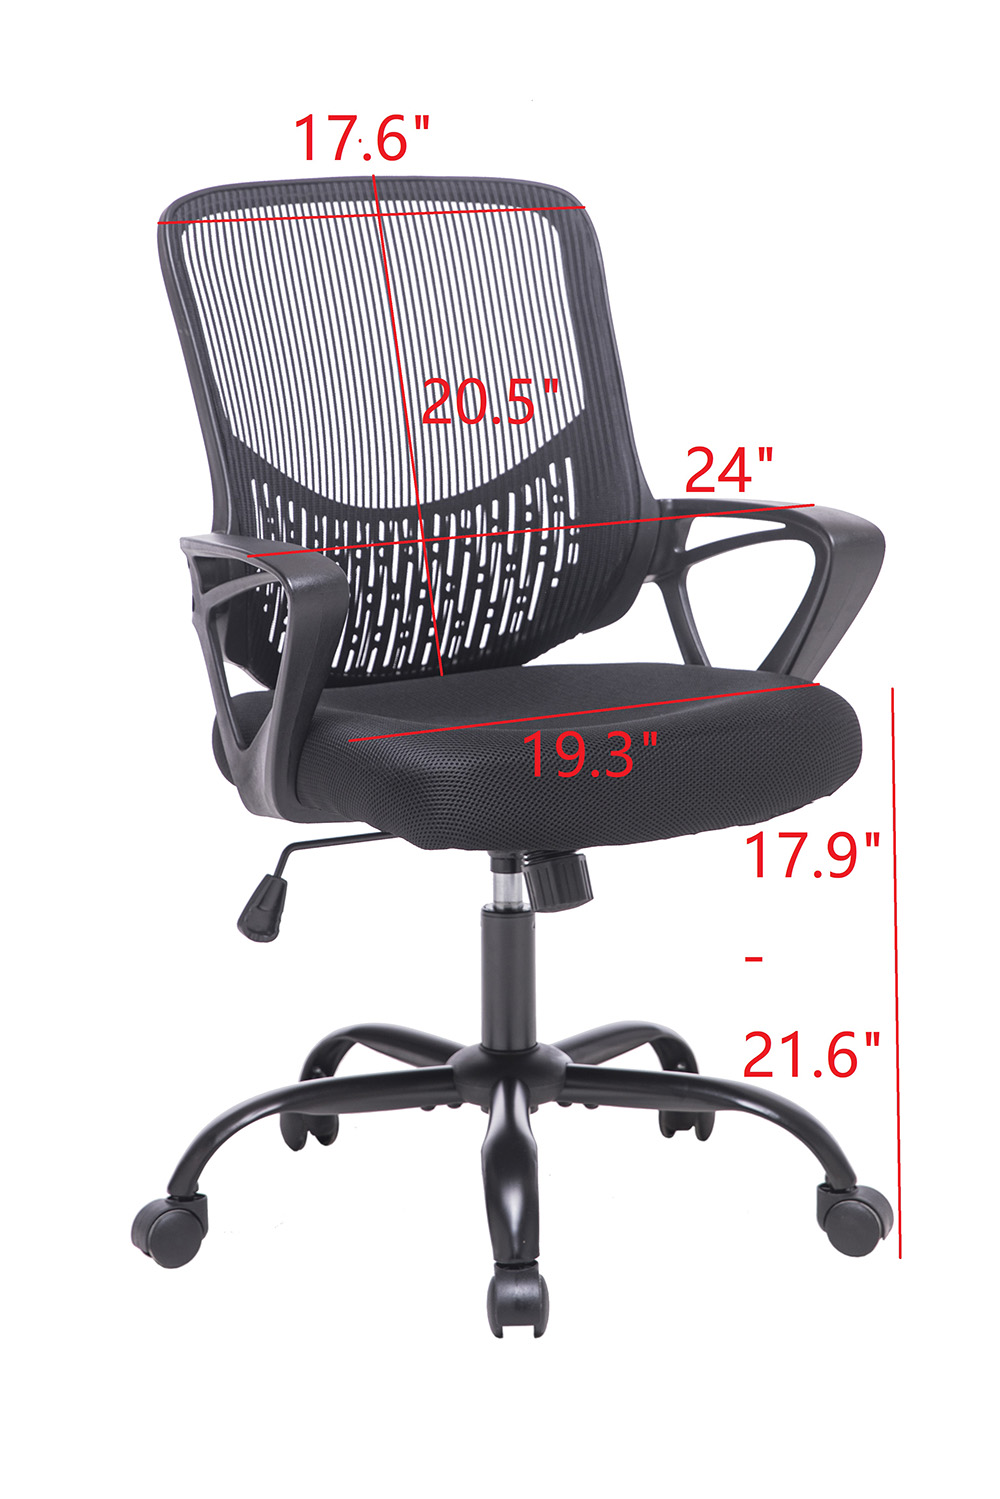 Home Office Rotatable Mesh Chair Height Adjustable with Ergonomic Mid Backrest and Armrest - Black